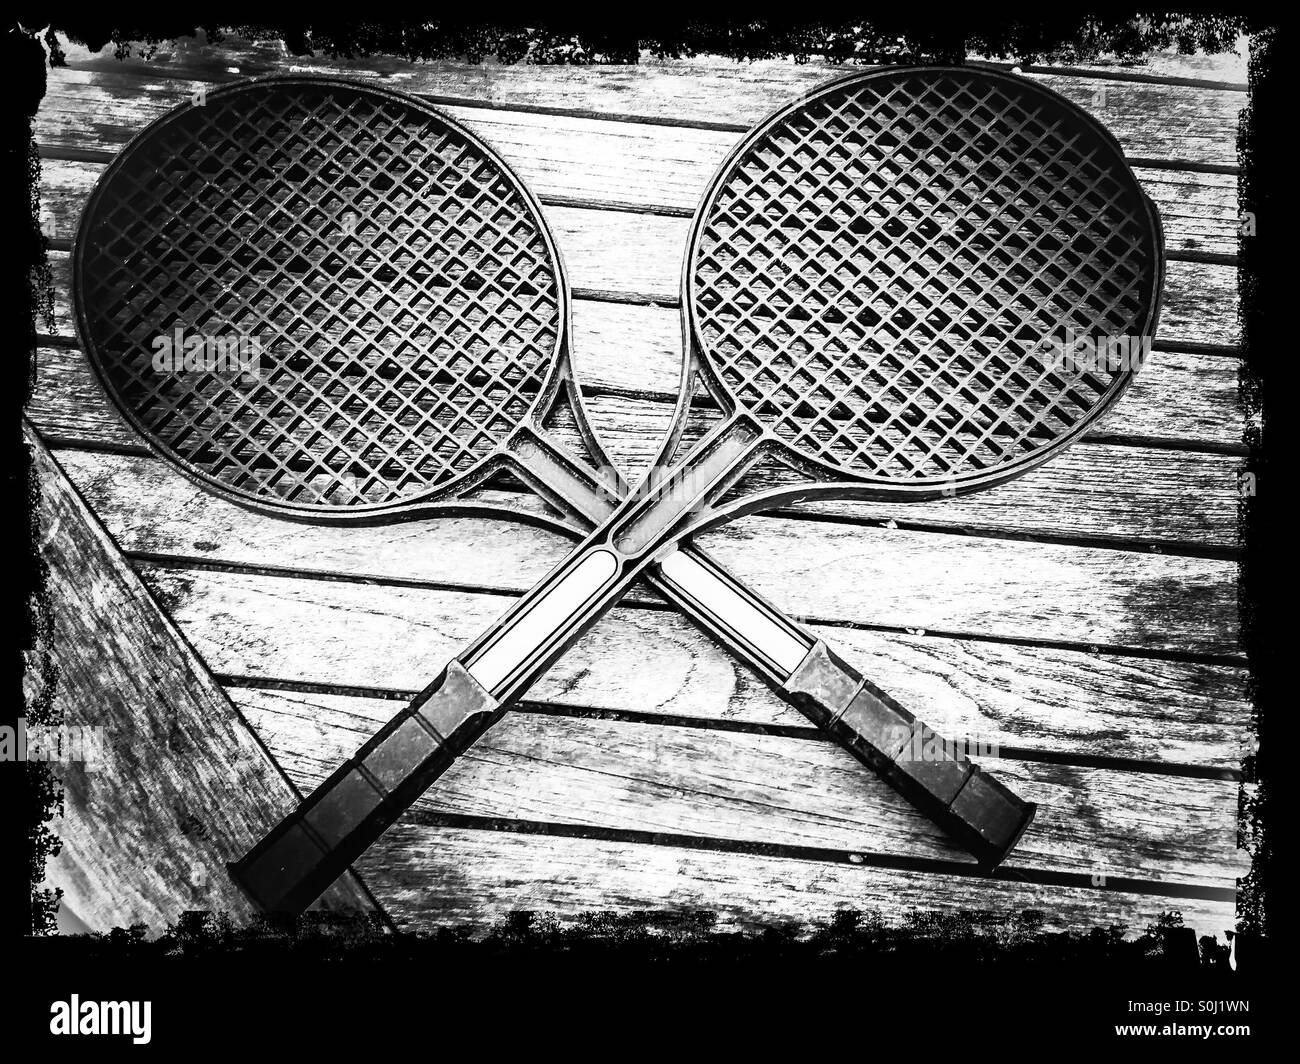 Two tennis rackets black and white Stock Photo